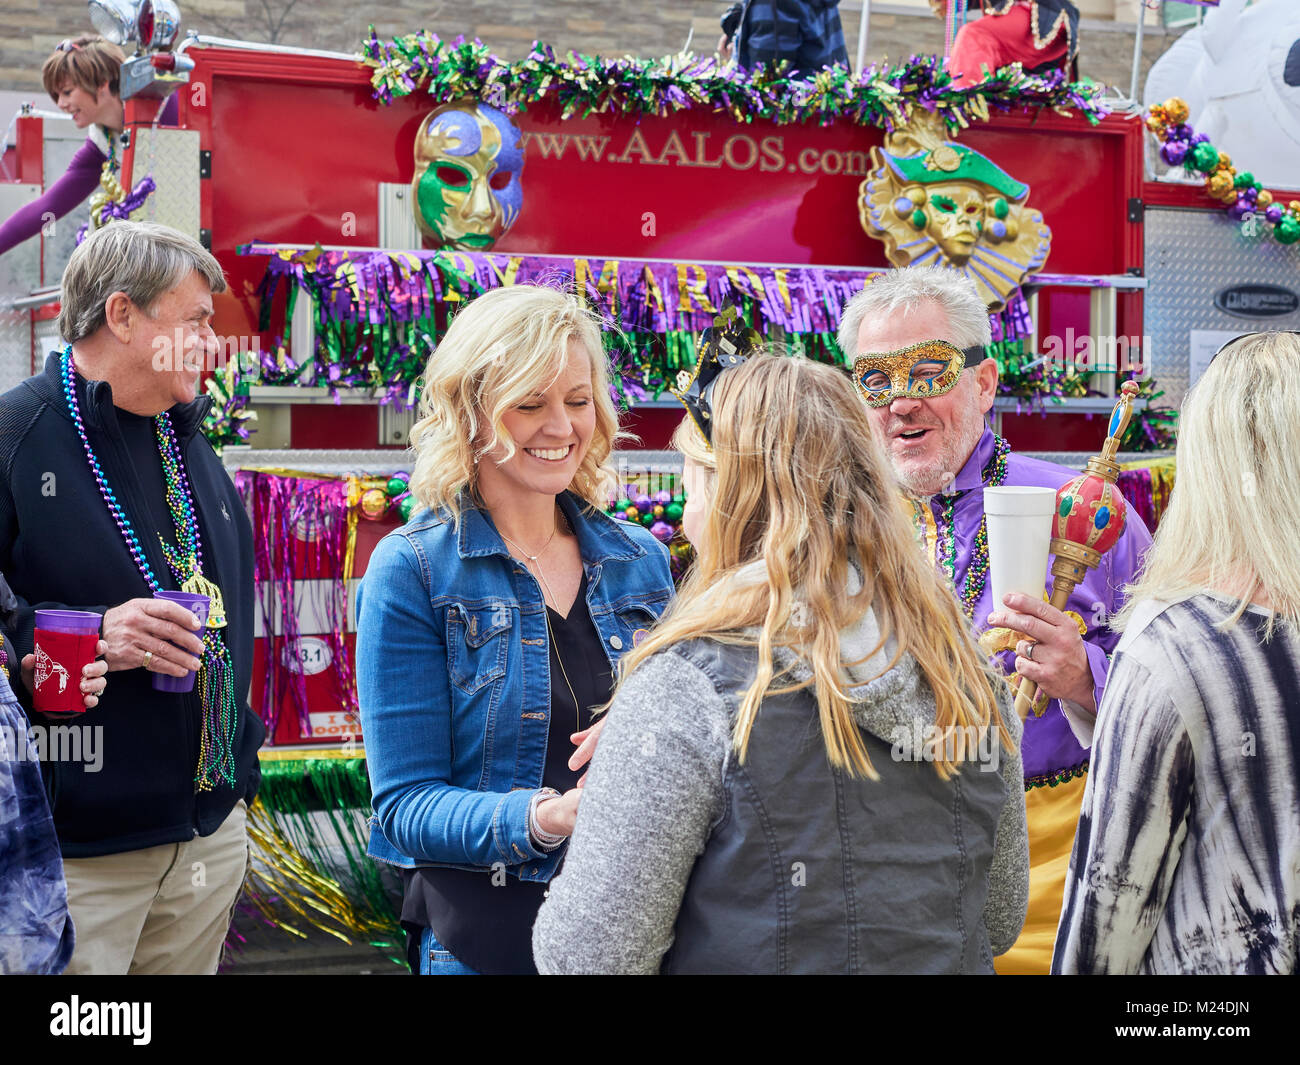 Family celebrating Mardi Gras with mother, and daughter with the father wearing a Mardi Gras mask and holding a scepter in Montgomery Alabama, USA. Stock Photo